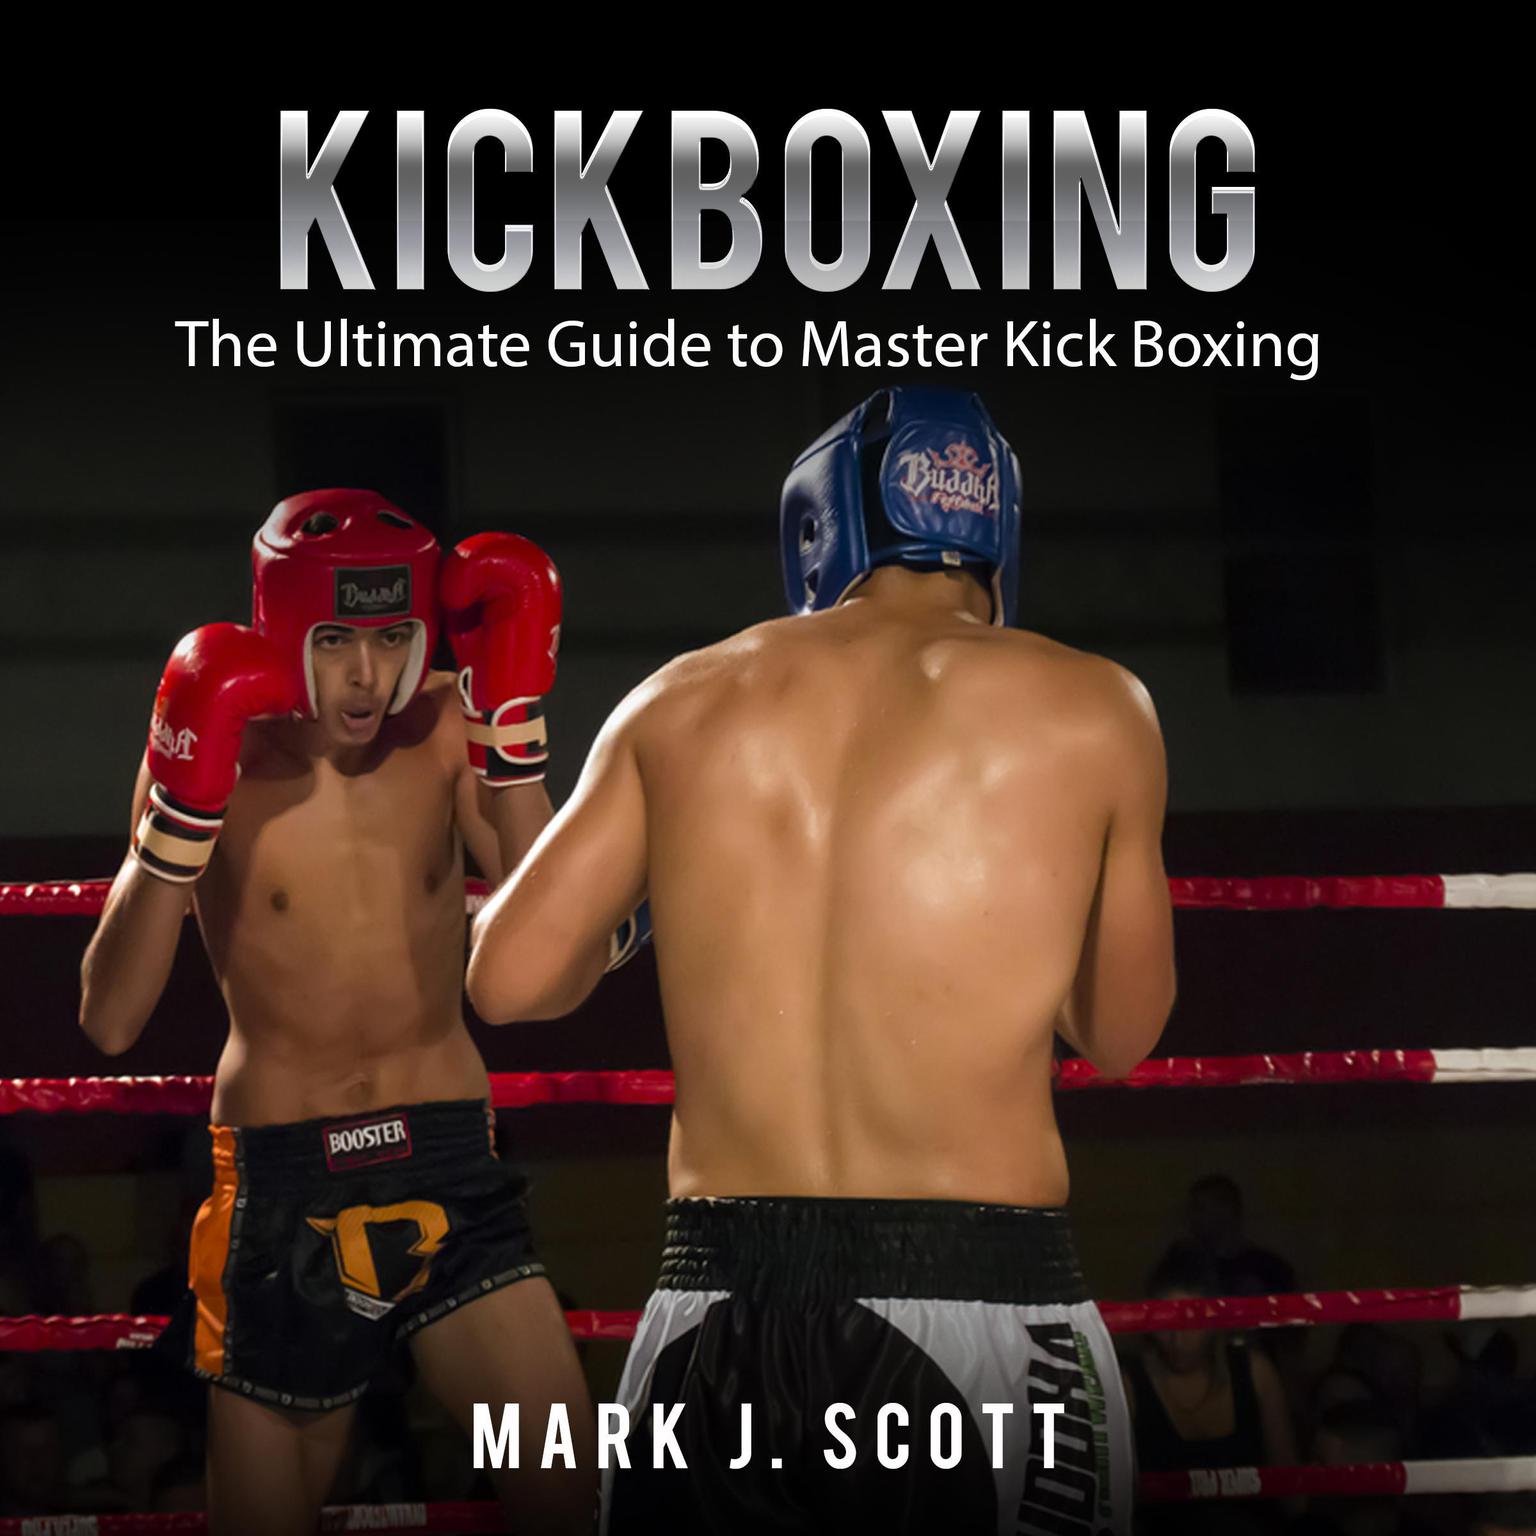 Kickboxing: The Ultimate Guide to Master Kick Boxing Audiobook, by Mark J. Scott